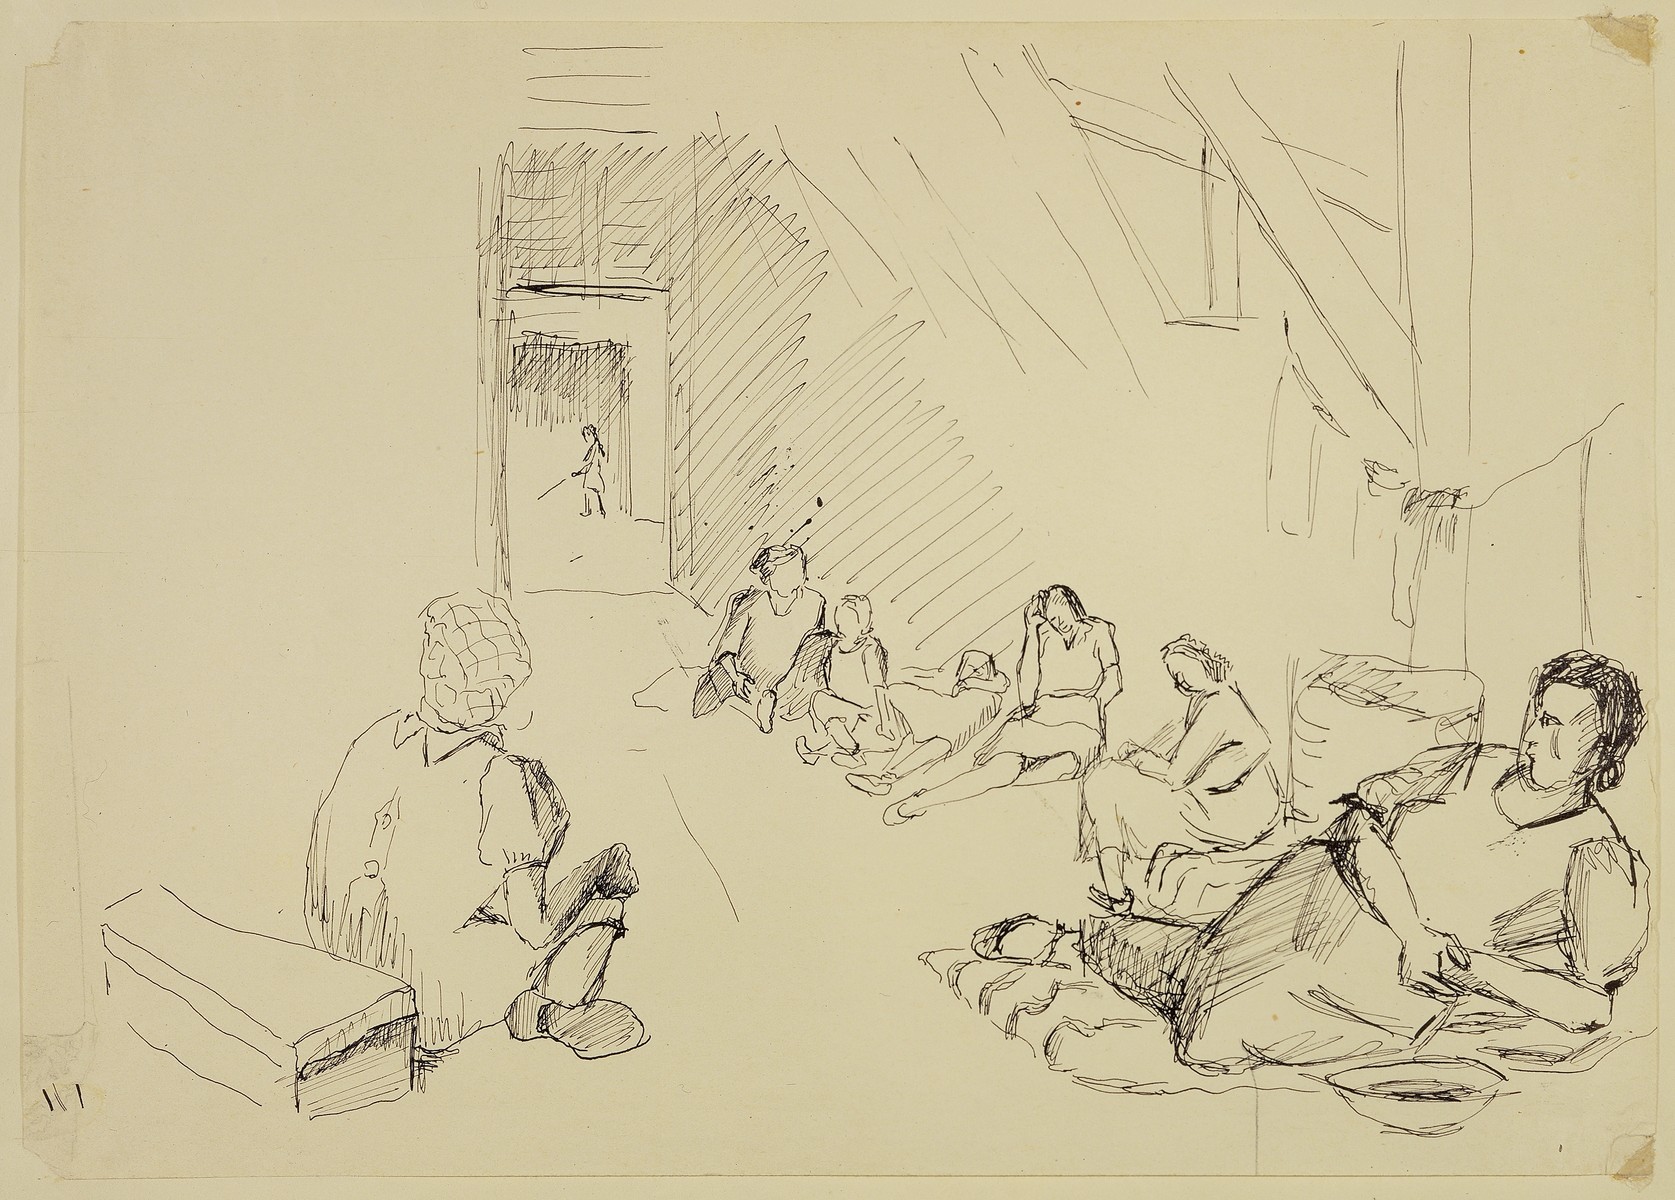 "Interior of Women's Barracks" by Lili Andrieux.